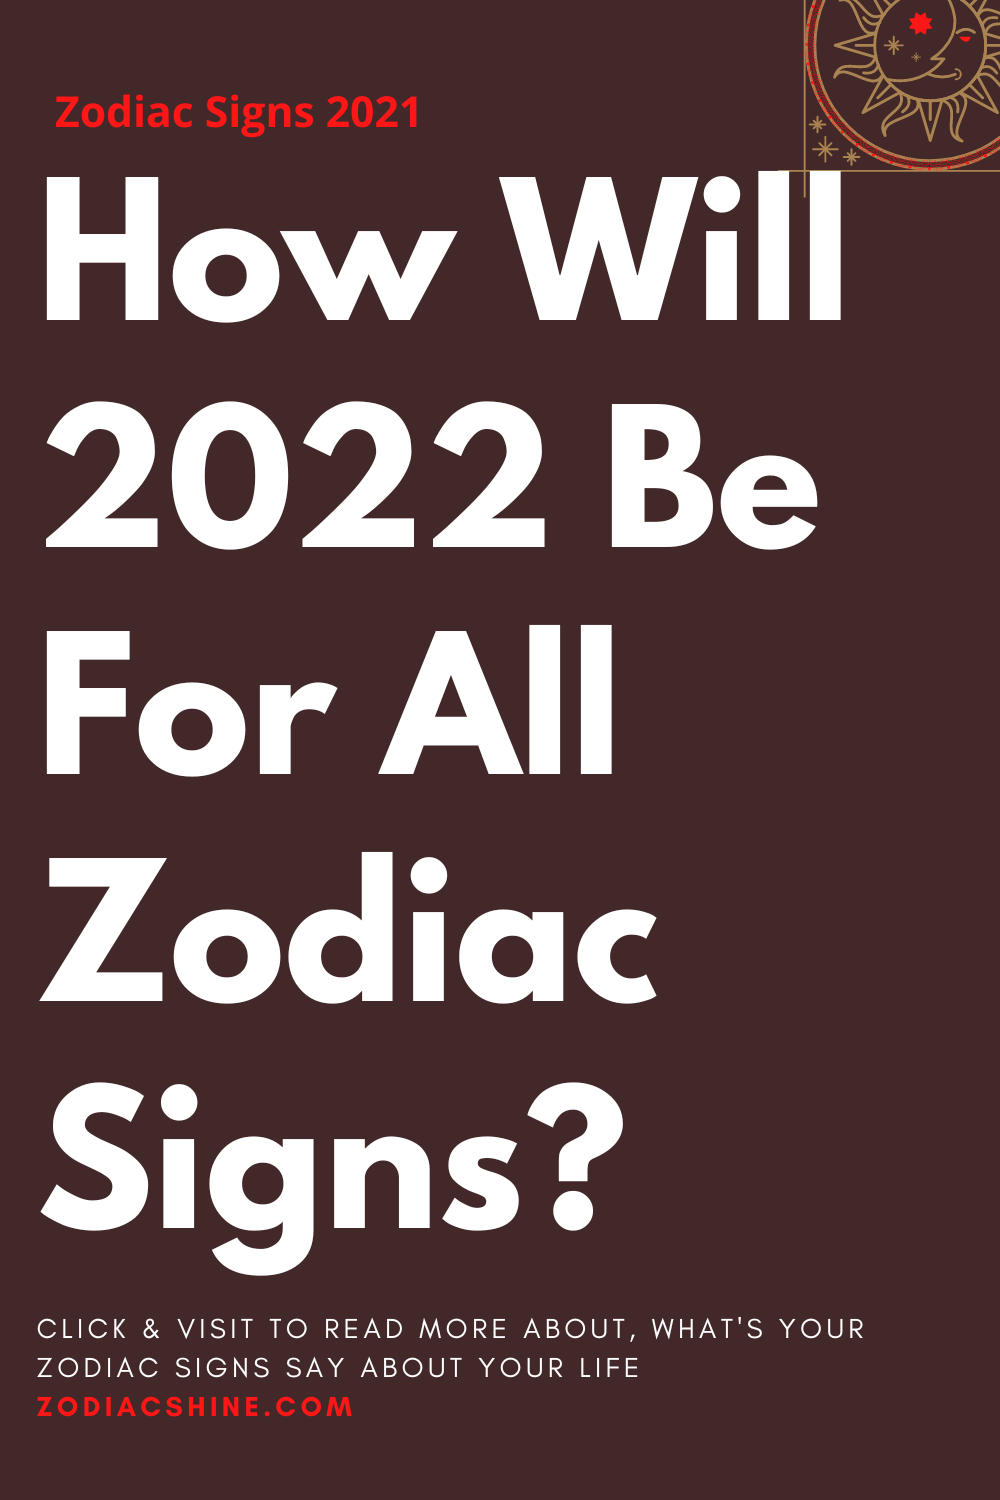 How Will 2022 Be For All Zodiac Signs?